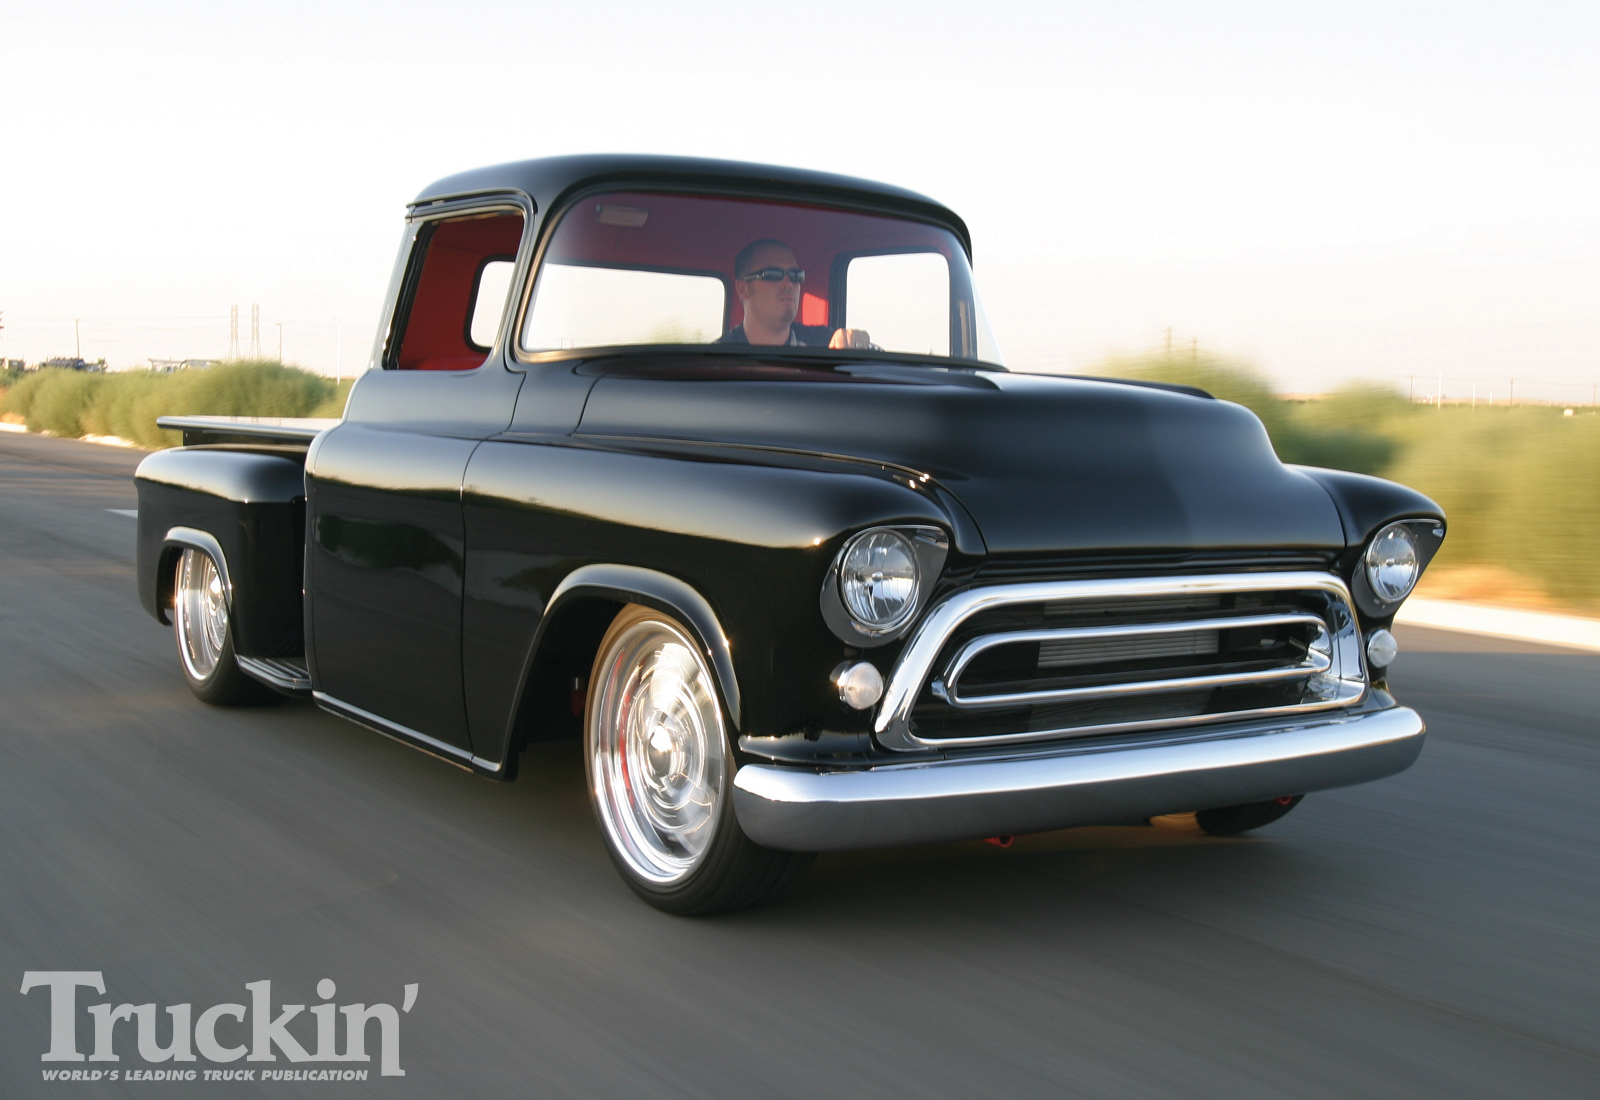 Thoolaypaw S Blog 1957 Chevy Stepside Pickup Round Tube Chassis